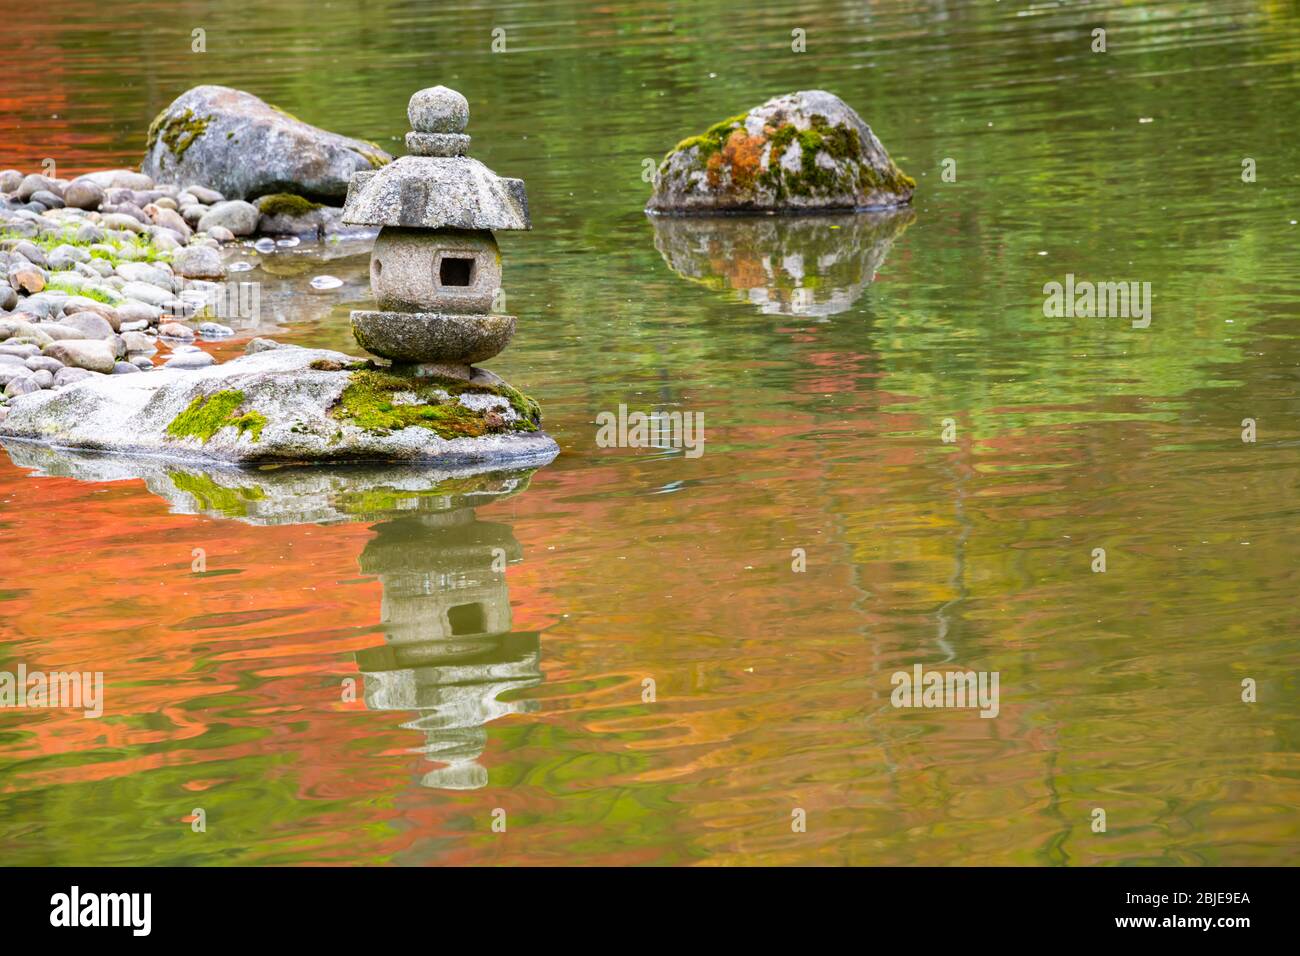 Japanese Garden Stone Lantern & Rock in Pond with Dreamy Orange & Green Reflections in Ripples Covering the Pond Stock Photo